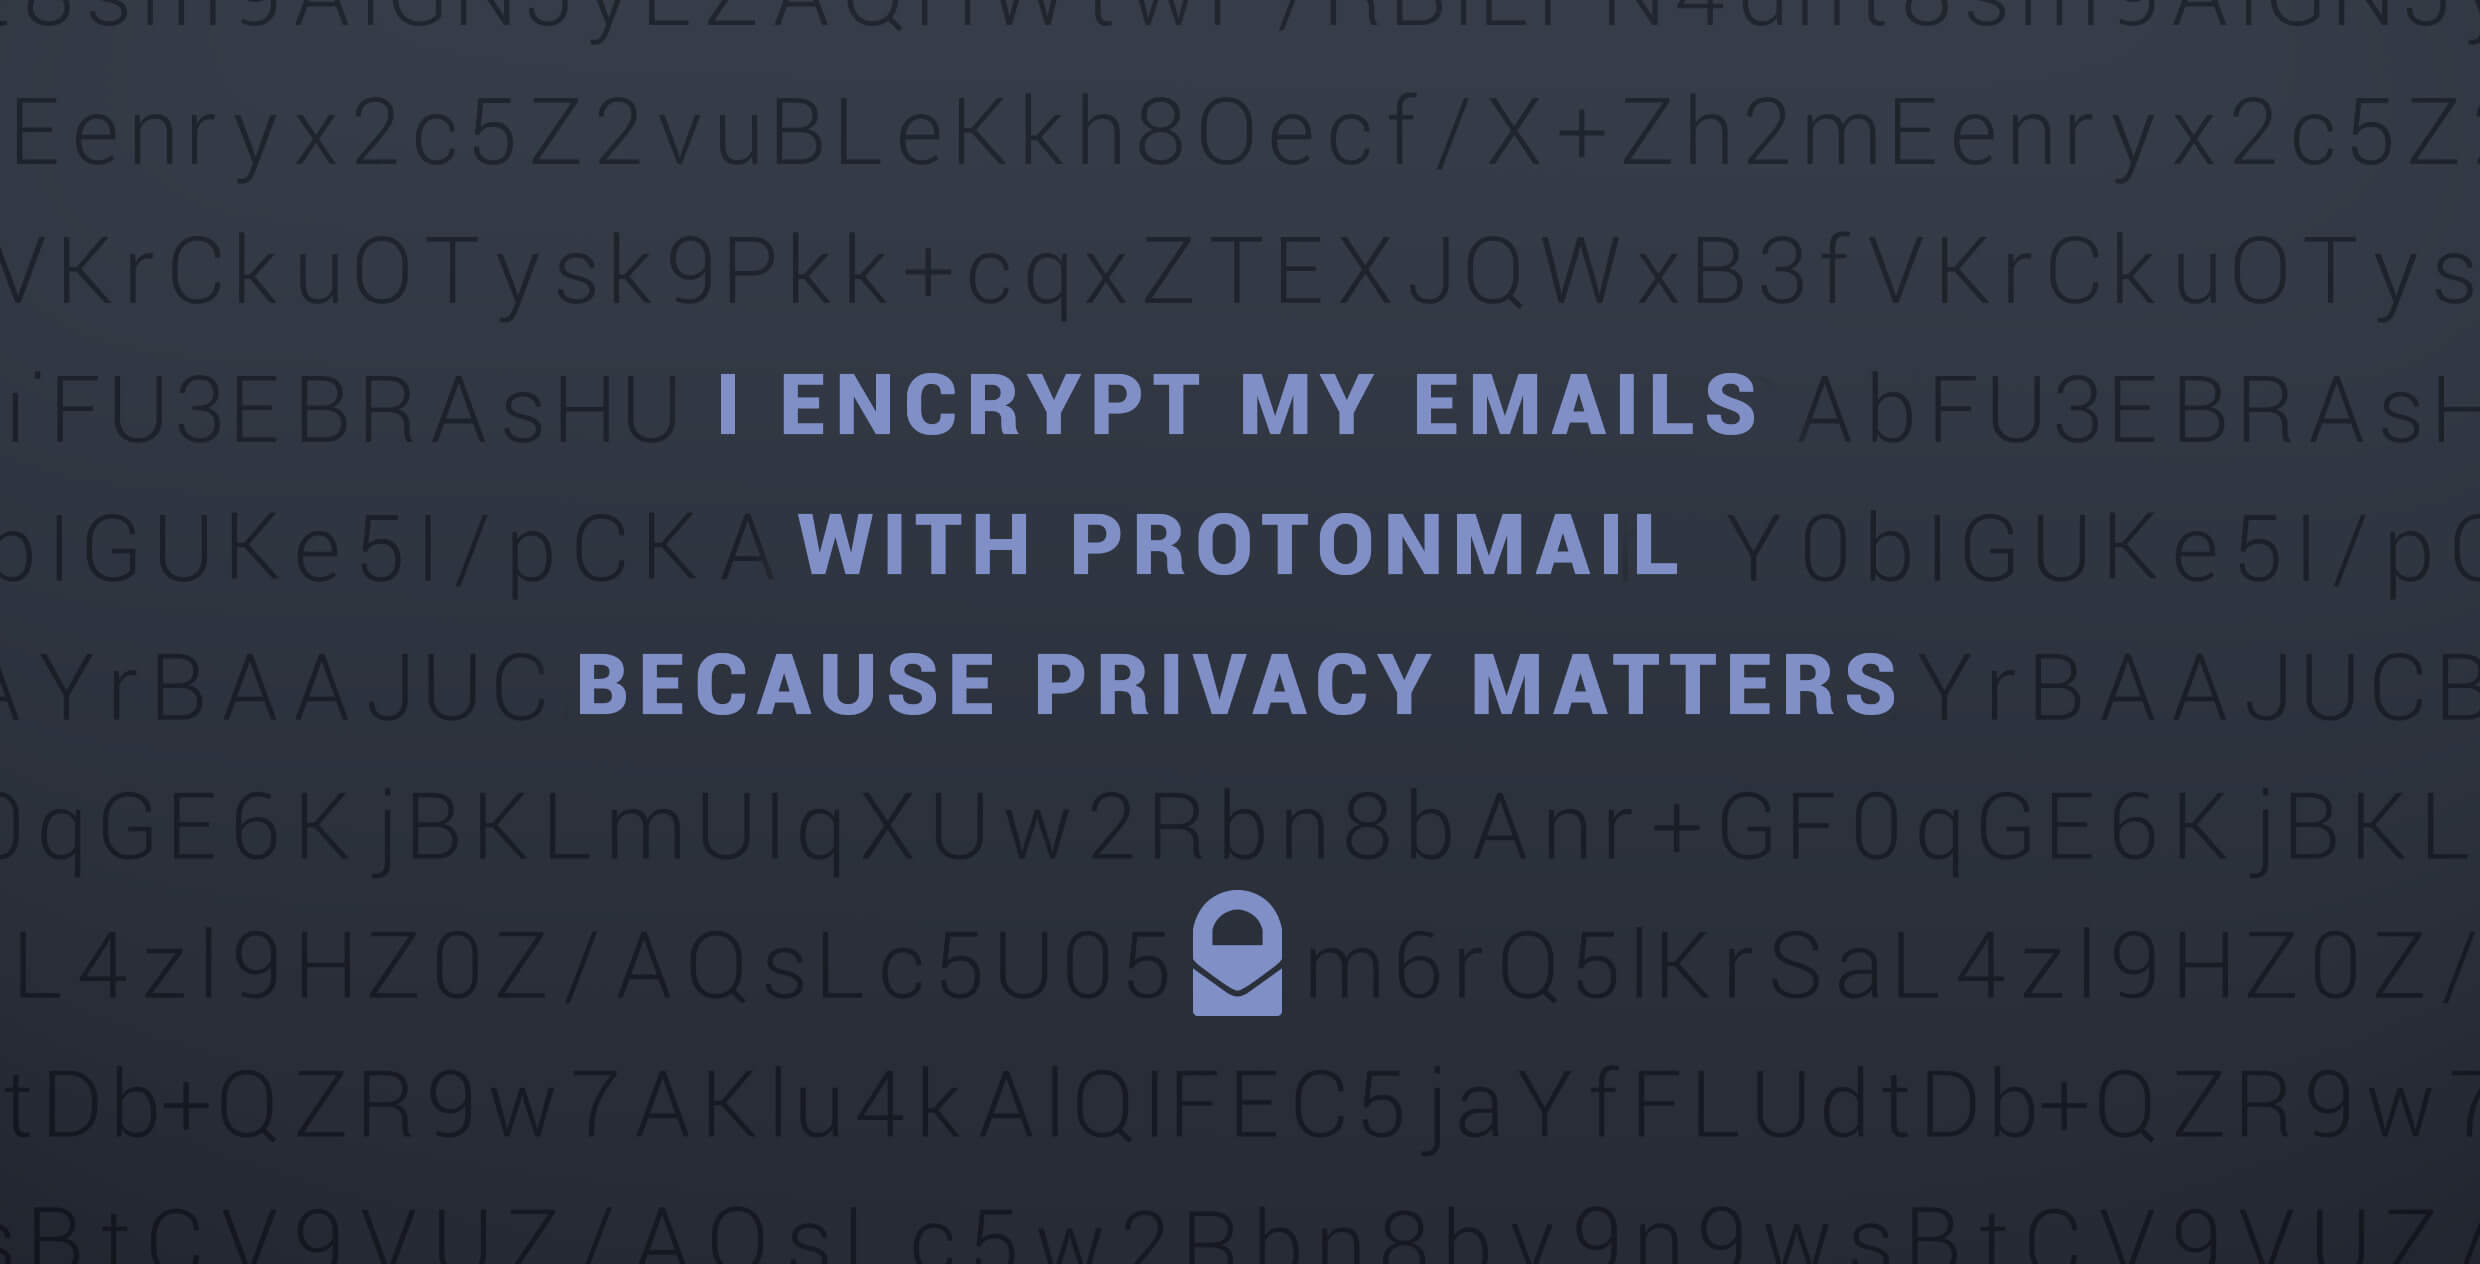 protonmail anonymous email